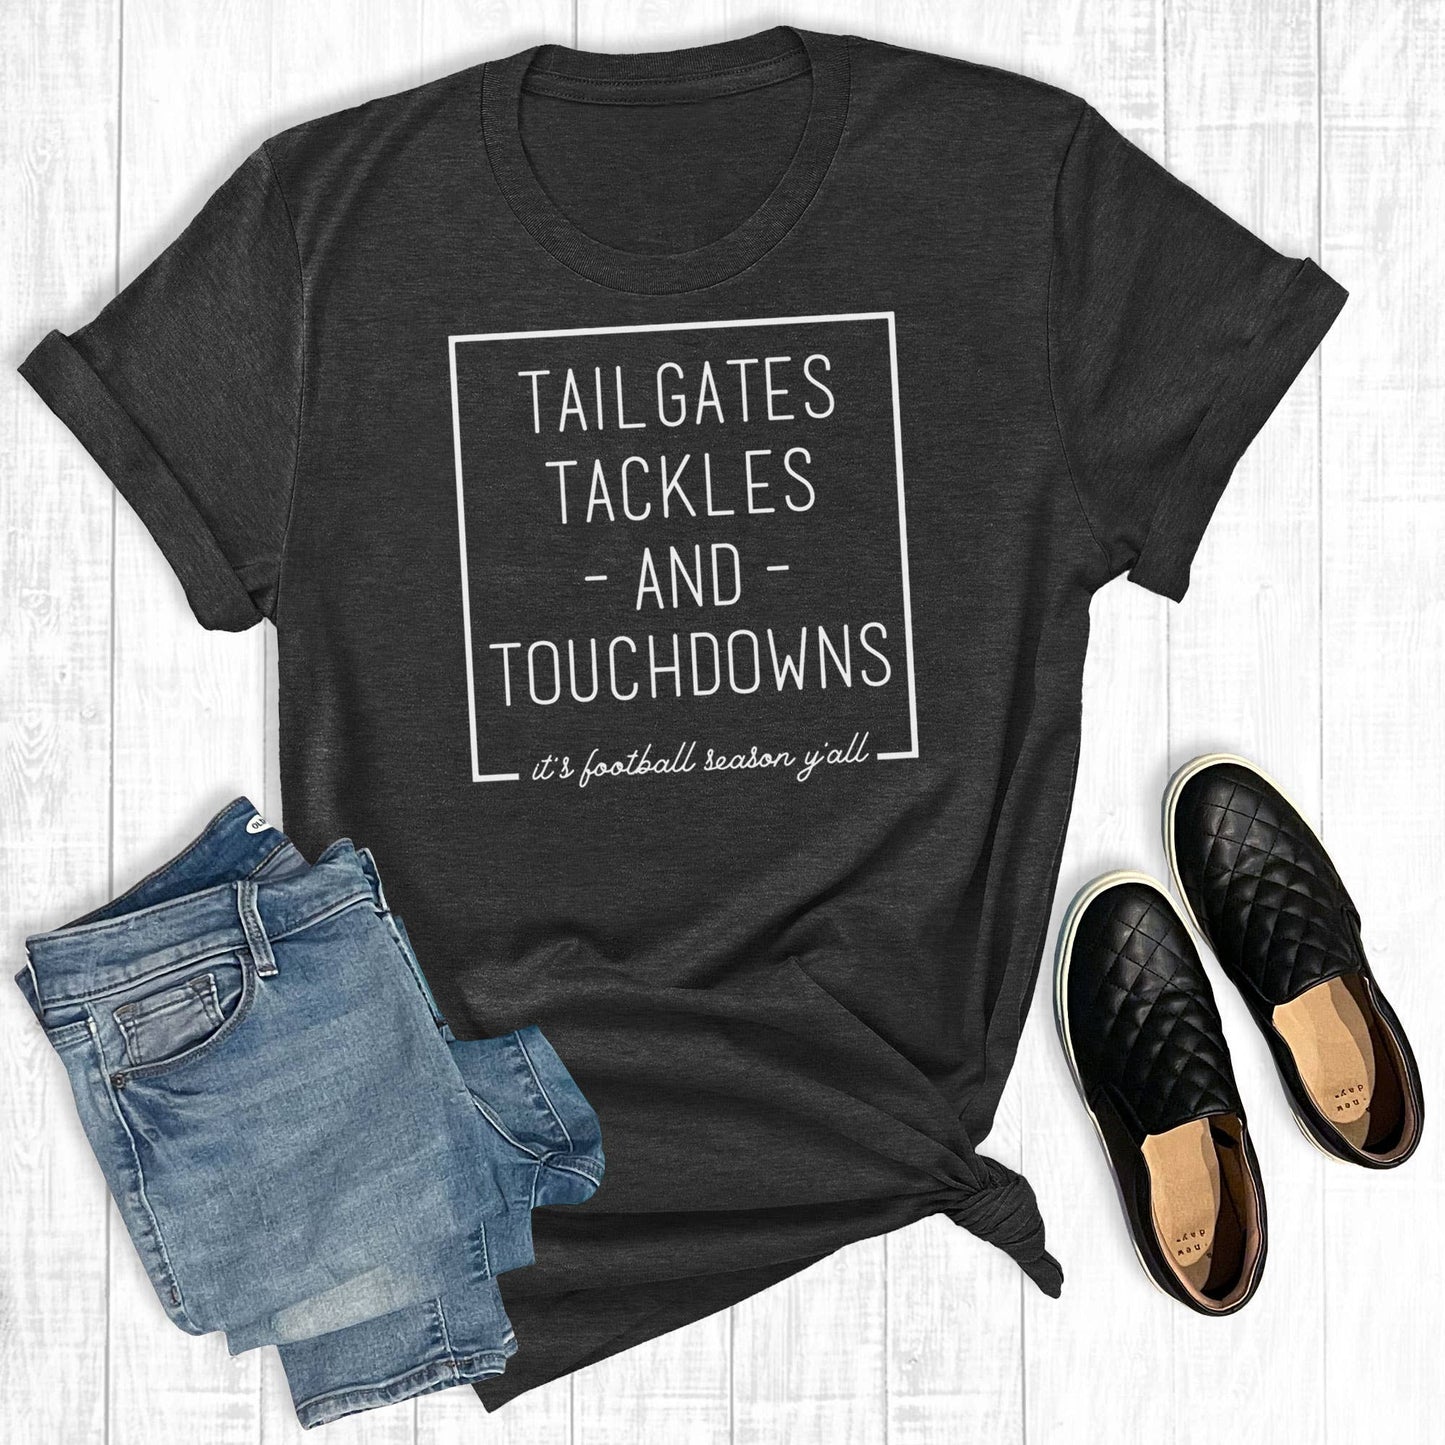 Tailgates, Tackles and Touchdowns